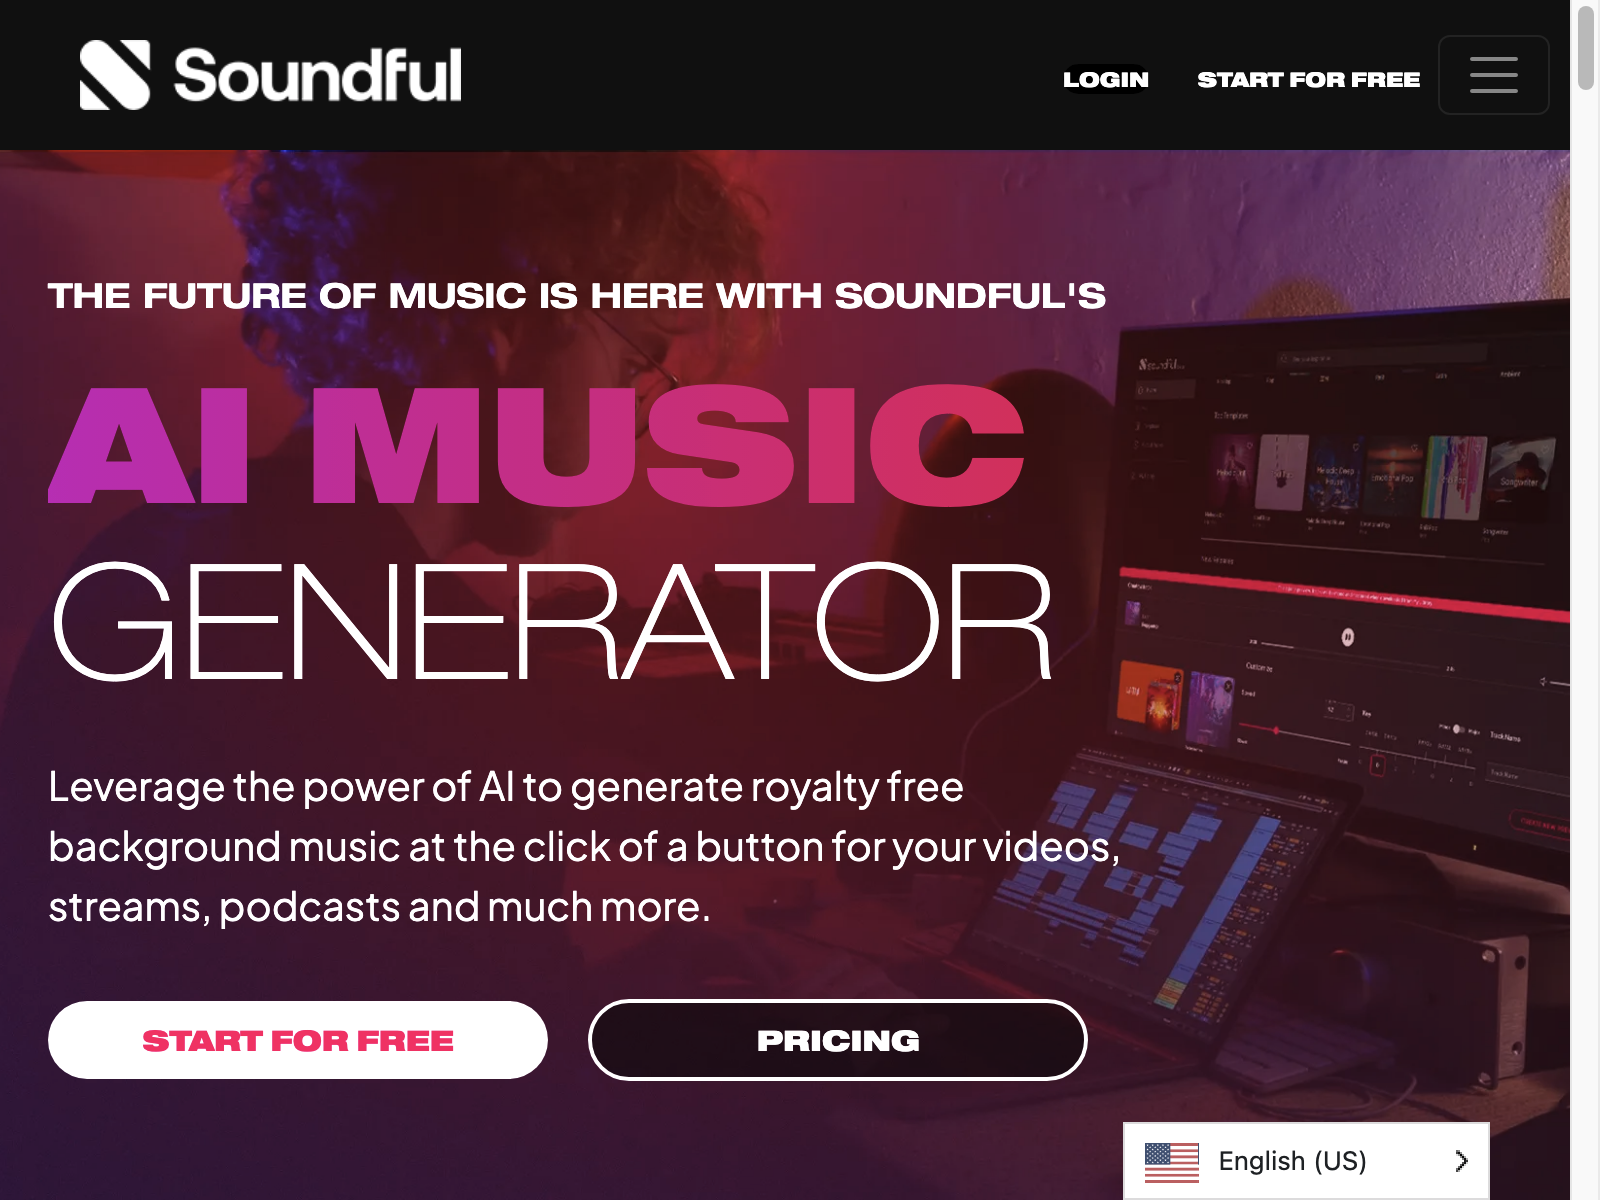 soundful Review: Pros, Cons, Alternatives